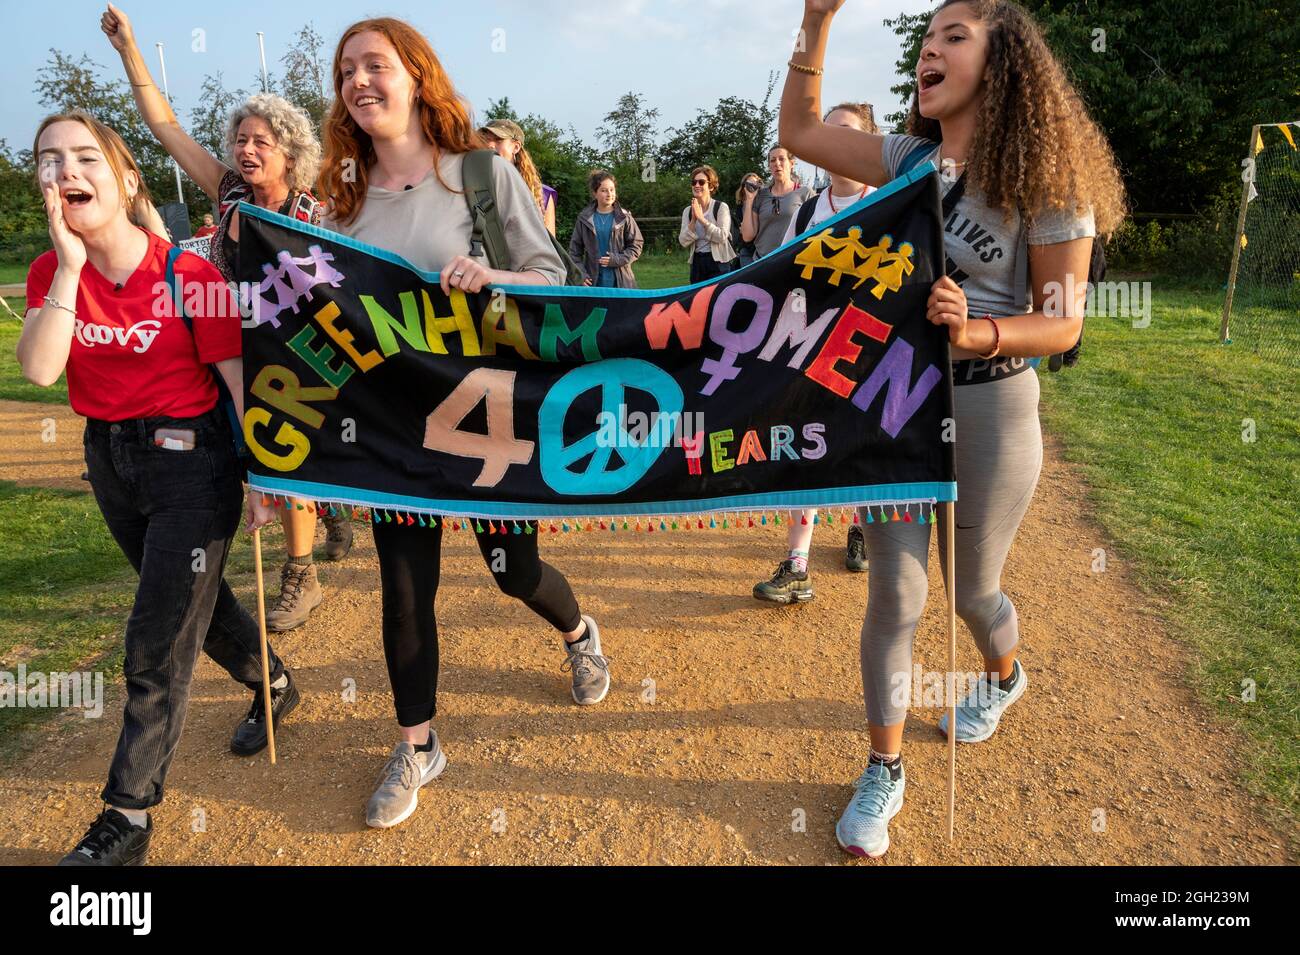 Women arrive at Greenham Common gates 40 years after the original march from Cardiff and the Greenham Womens Peace Camp on 5th September 1981. Stock Photo